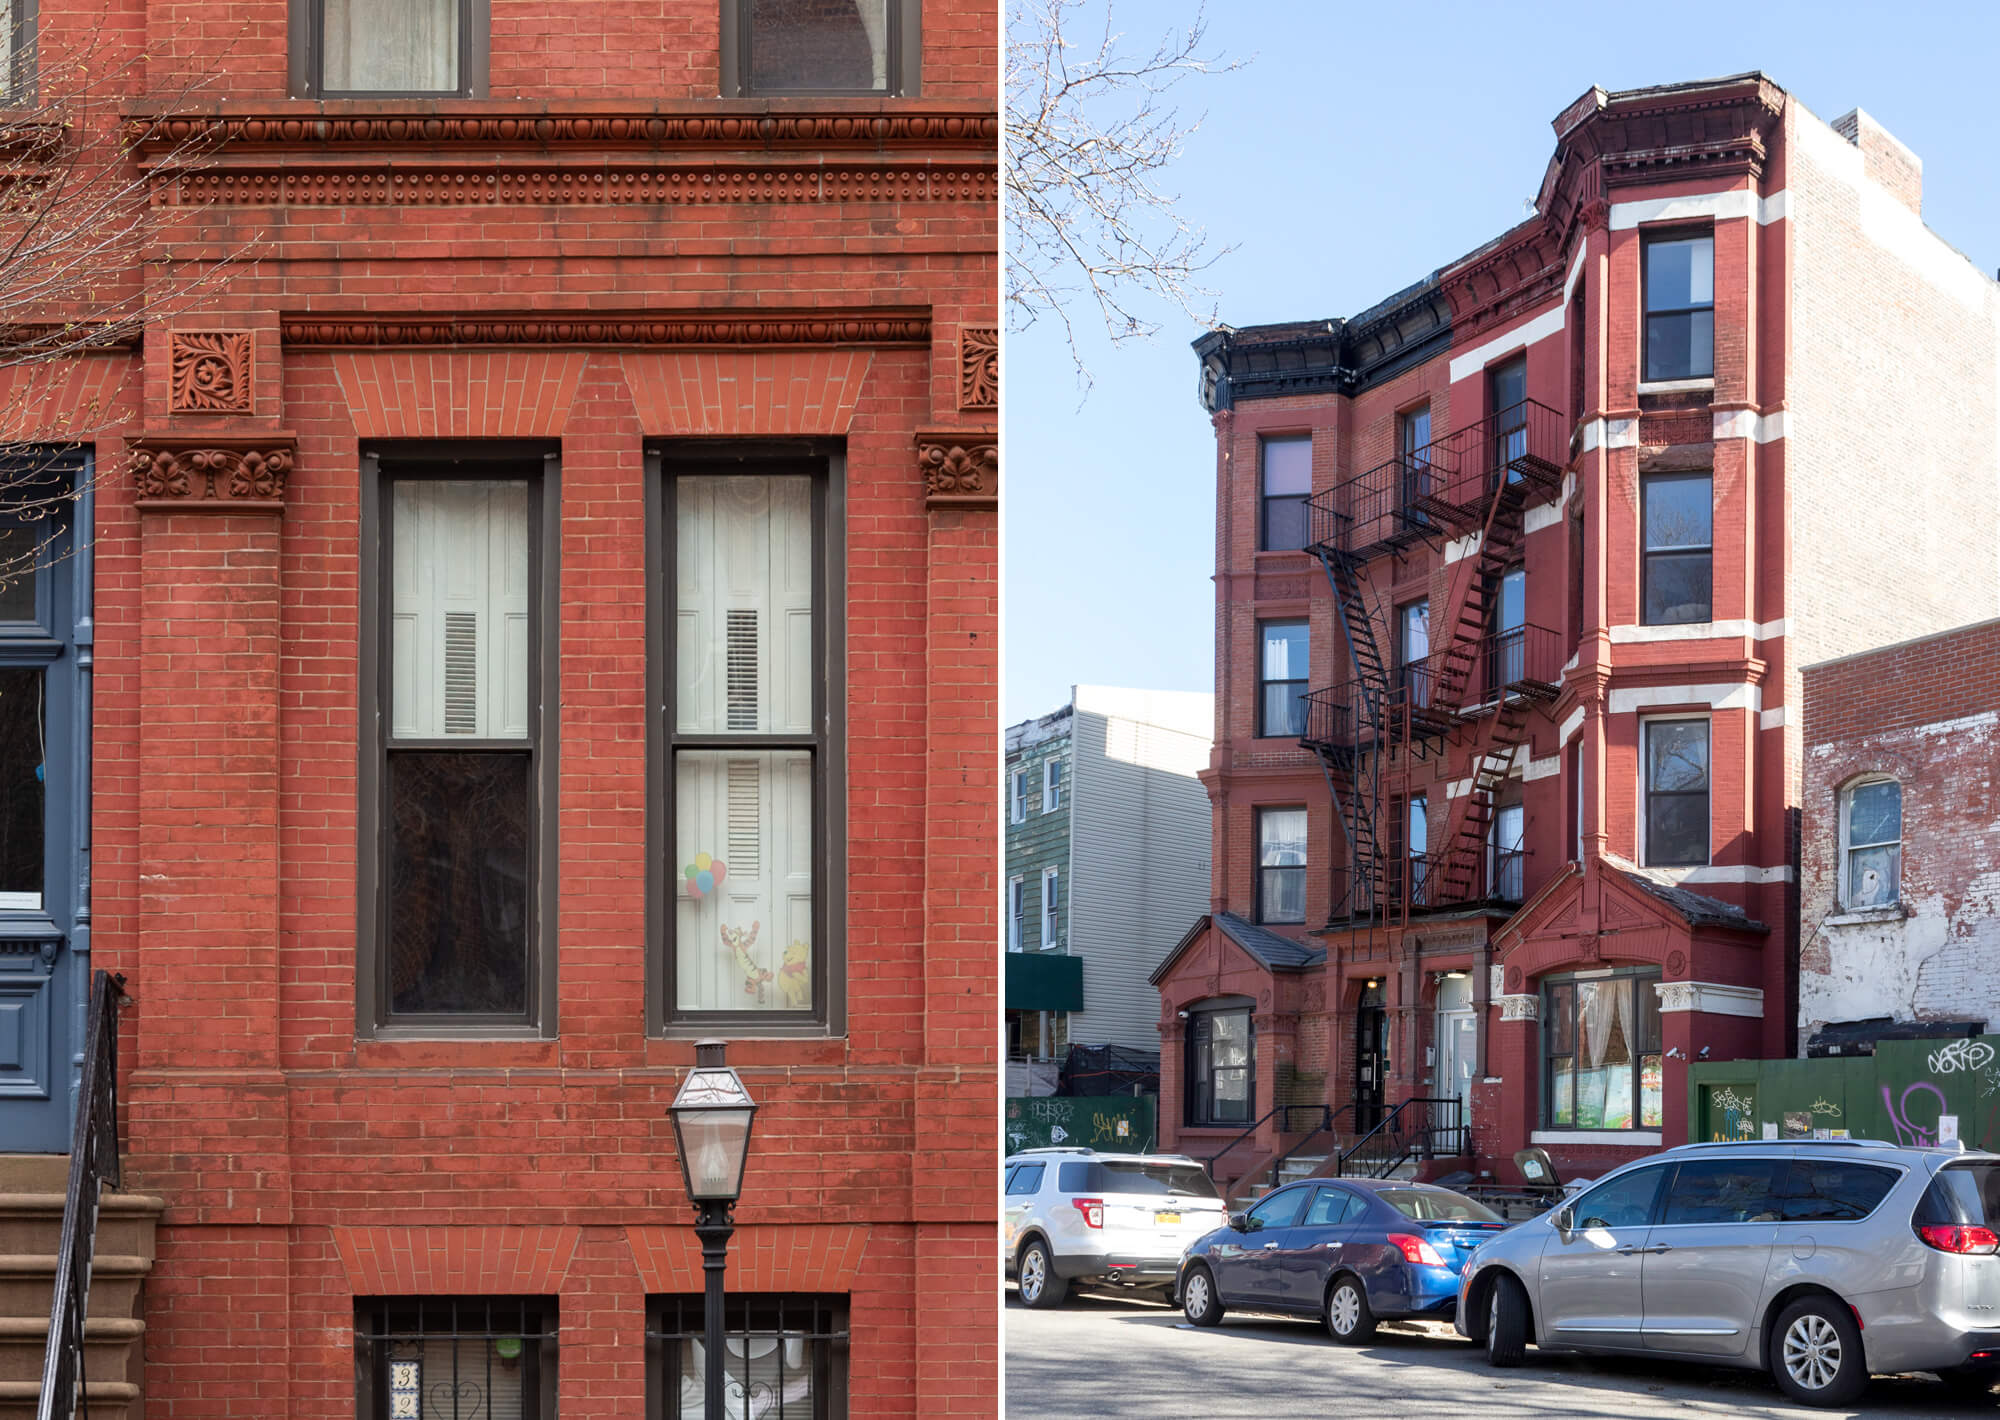 Left, A brick row house on 4th Street in Park Slope. Right, A Queen Anne style apartment building on Lafayette Avenue in Bed Stuy